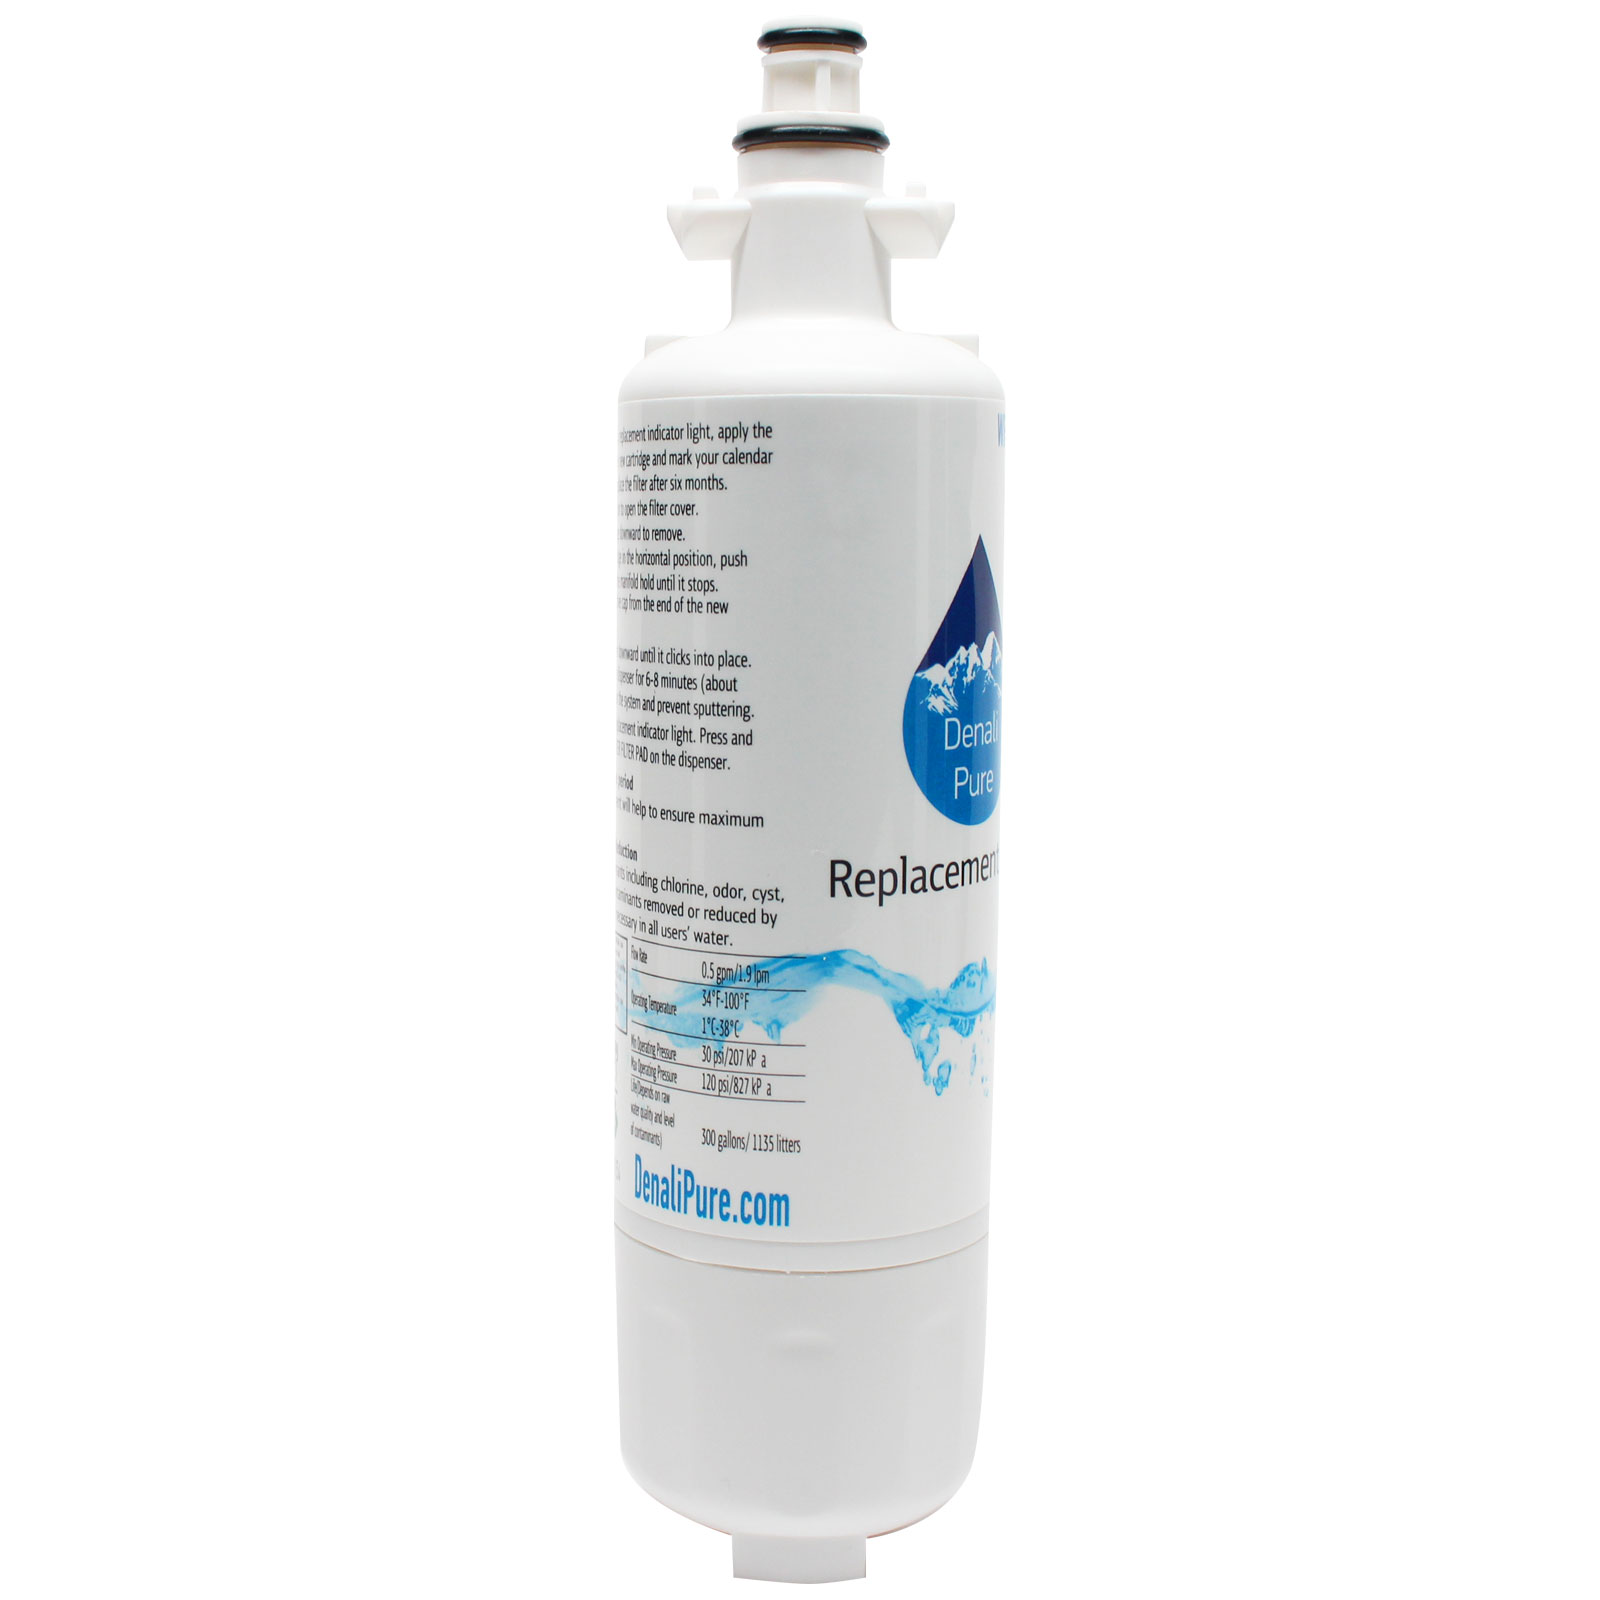 UpStart Components Replacement Kenmore / Sears 46-9690 Refrigerator Water Filter - Compatible Kenmore / Sears 46-9690 Fridge Water Filter Cartridge